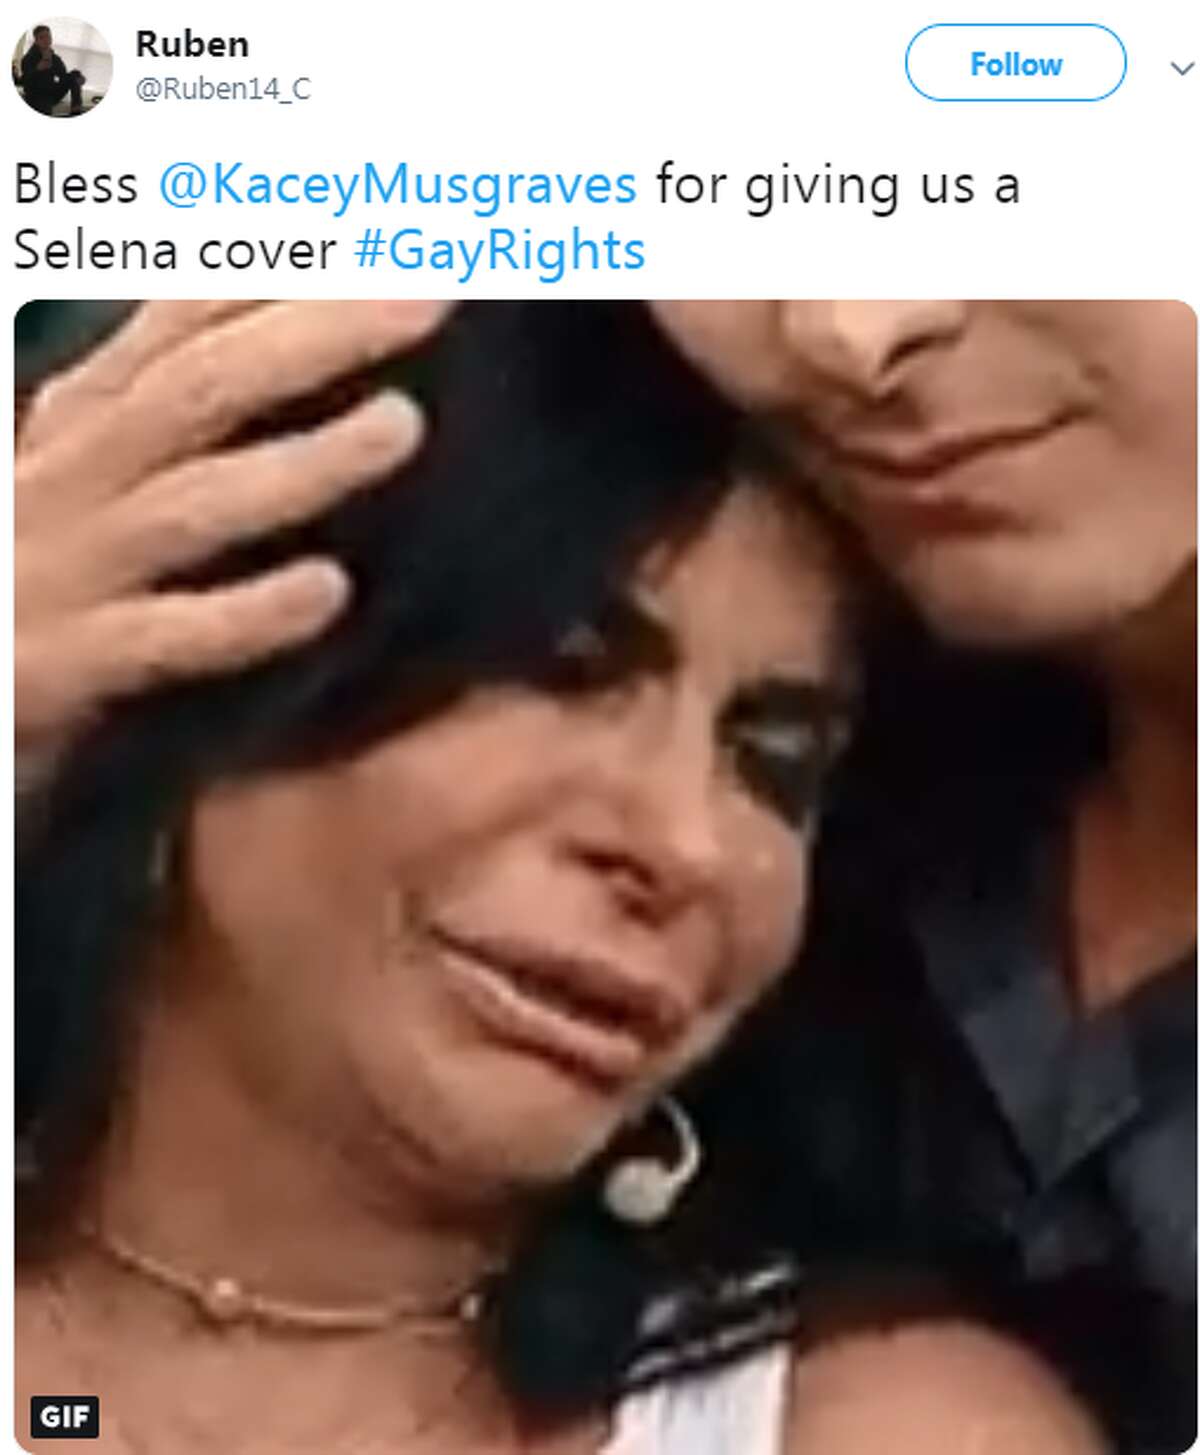 Twitter reacts to Grammy Award-winner Kacey Musgraves covering "Como La Flor" by Selena.